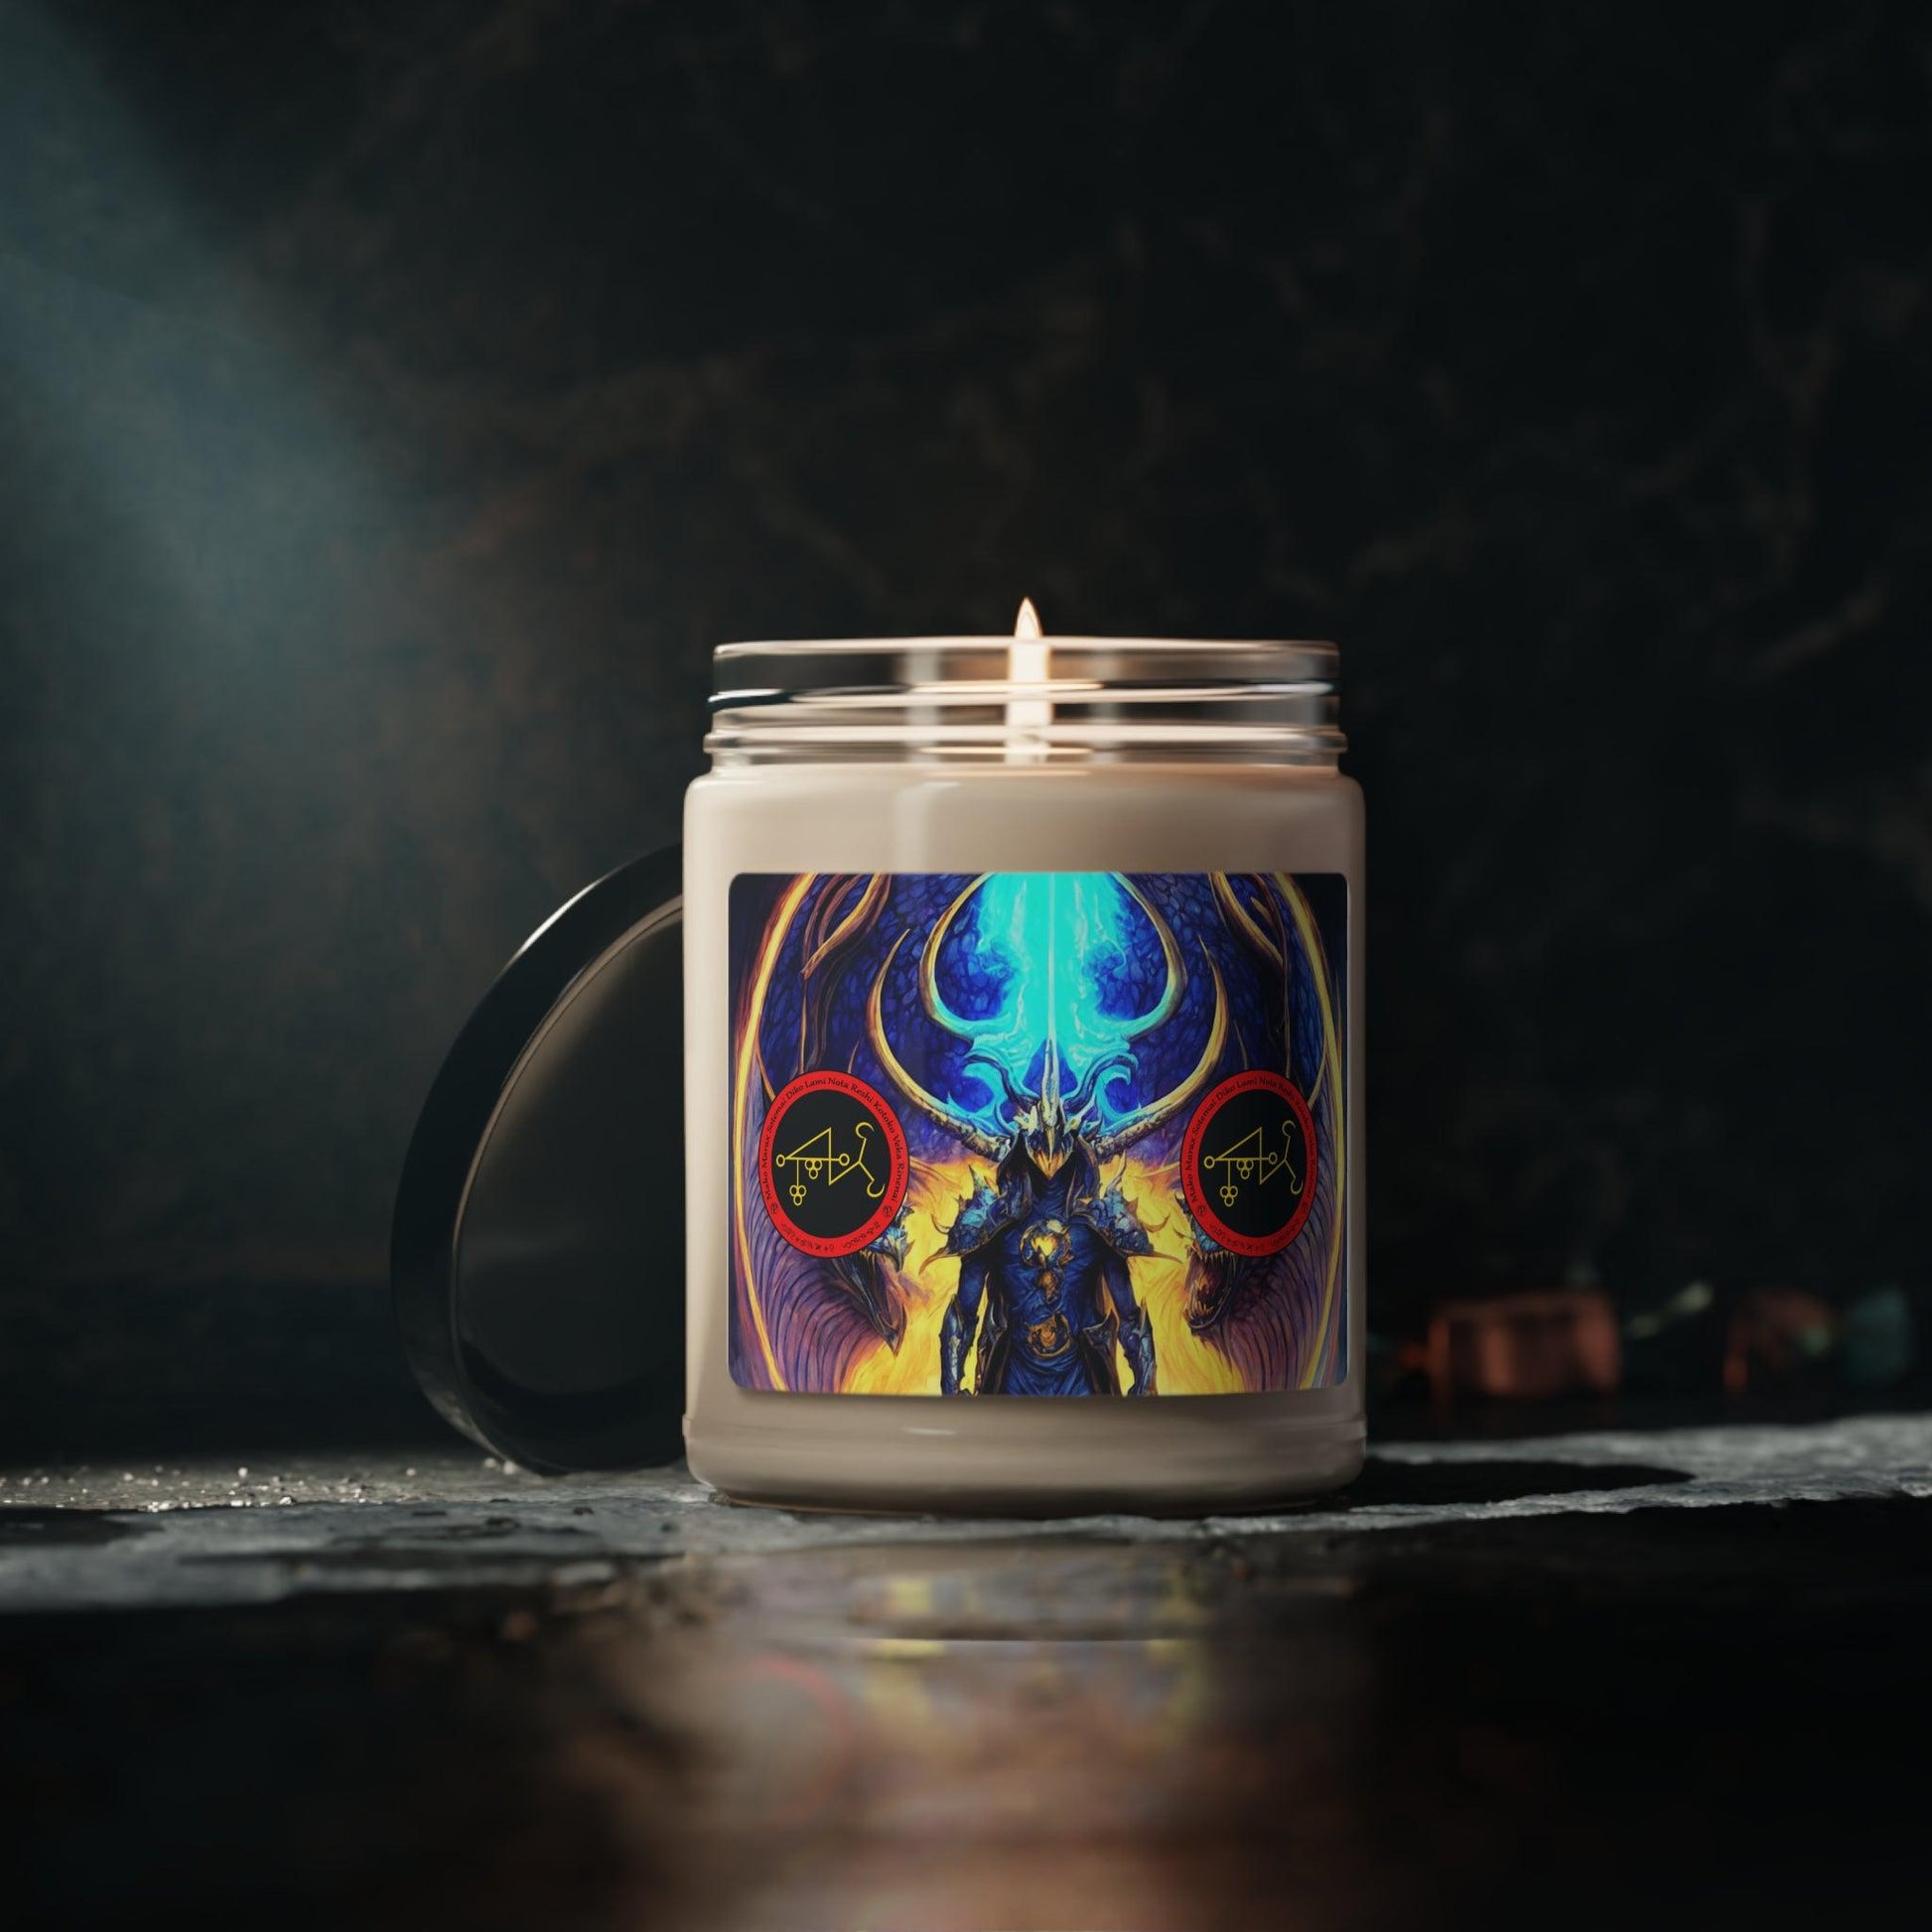 Demon-Marax-Altar-Scented-Soy-Candle-To-Learn-Magic-and-witchcraft-in-offerings-rituals-initiations-or-praying-and-meditation-15